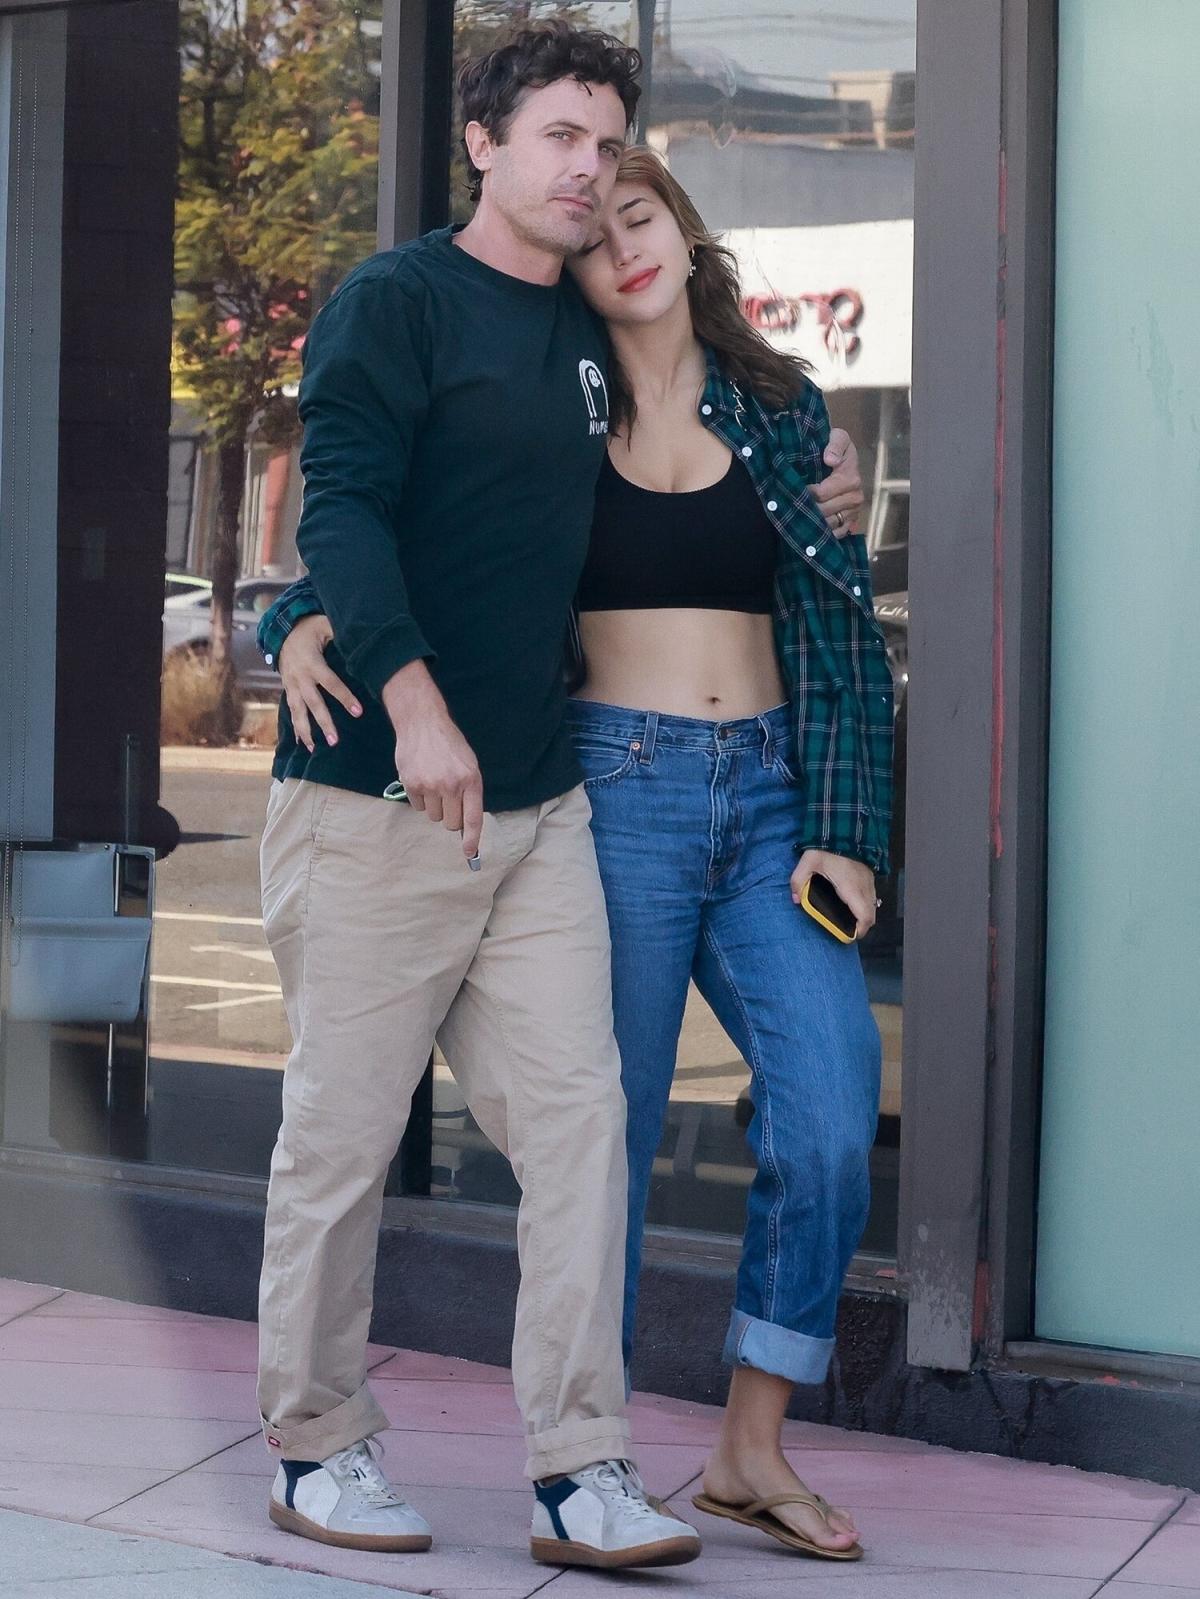  Casey Affleck and Girlfriend Seen in L.A. Ahead of Brother Ben's Wedding to Jennifer Lopez in Georgia 